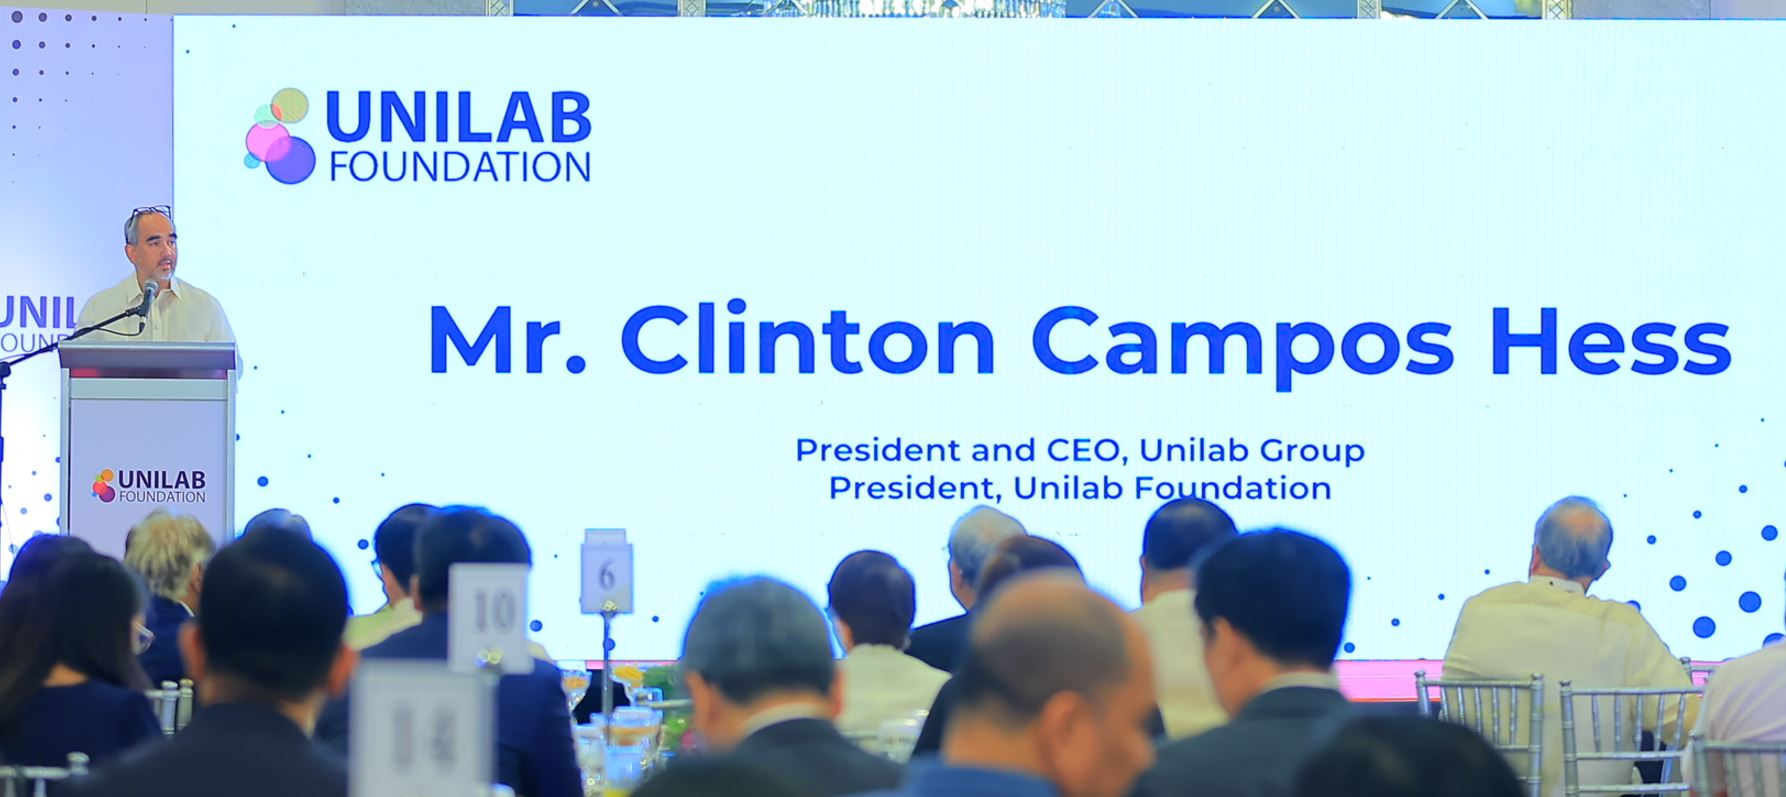 Unilab Foundation launches Unilab Center for Health Policy to help bridge healthcare system gaps in PH